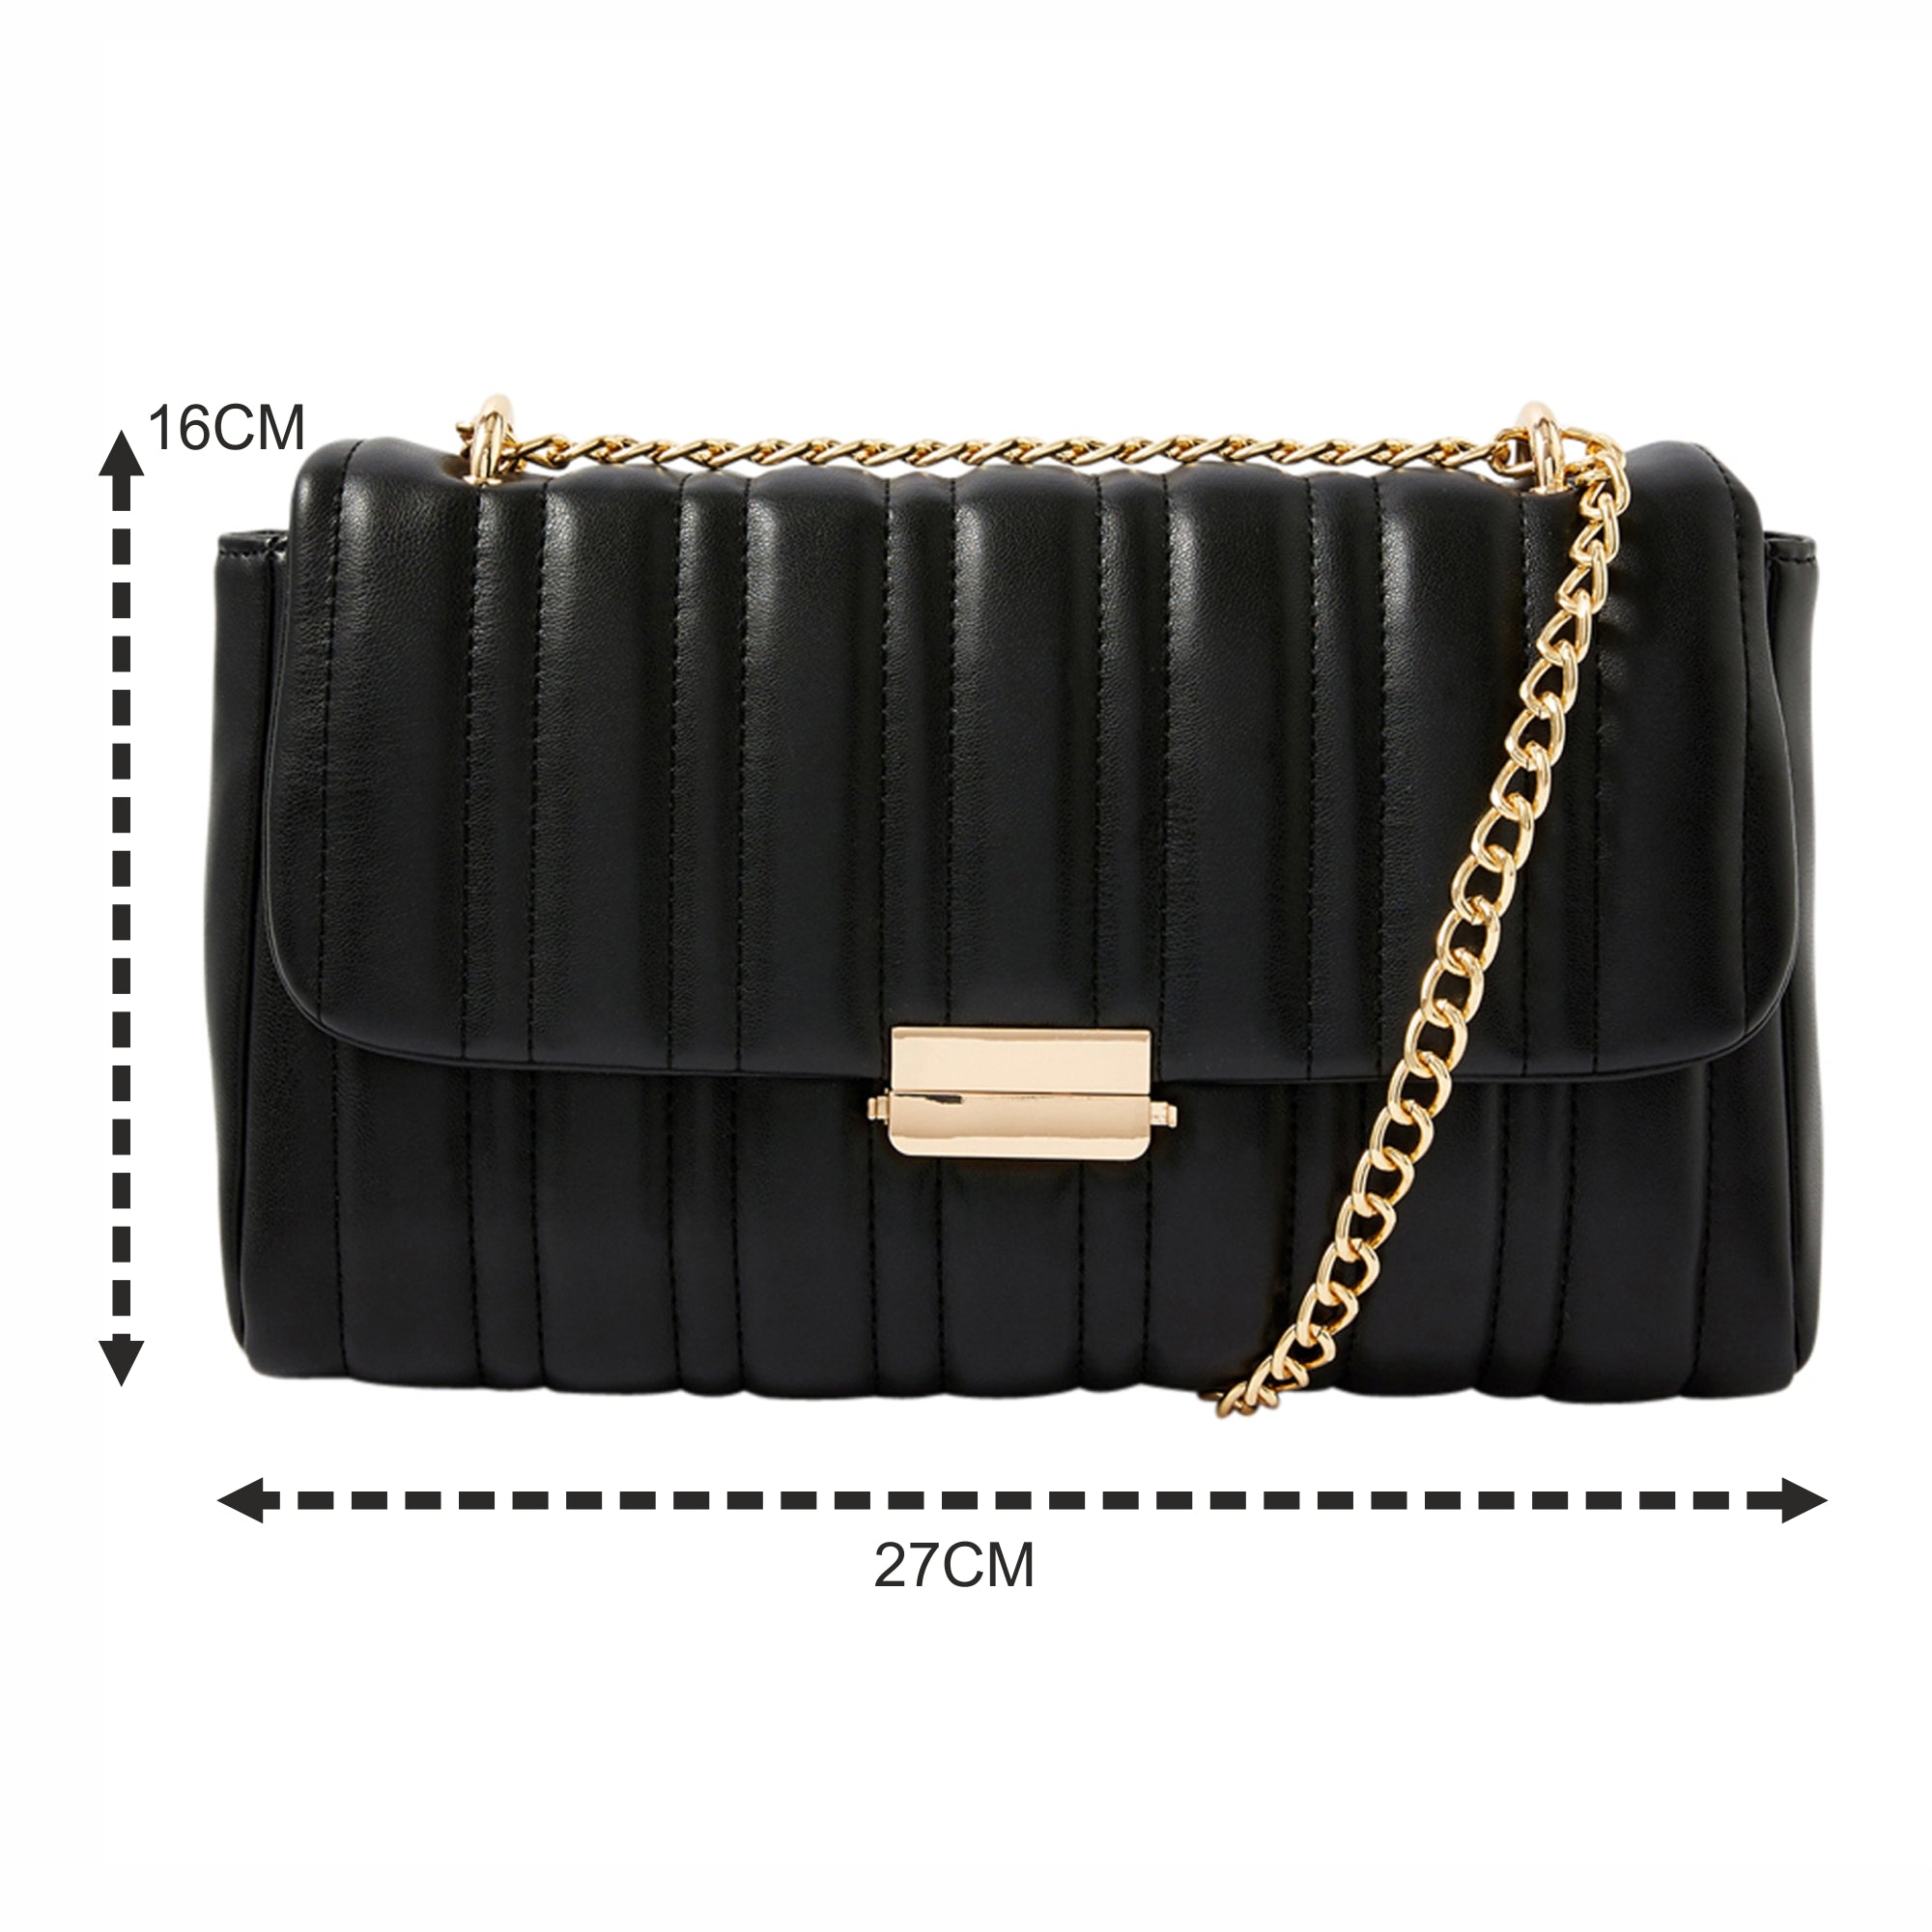 Buy Black Carrie Chain Quilt Sling Bag Online - Accessorize India